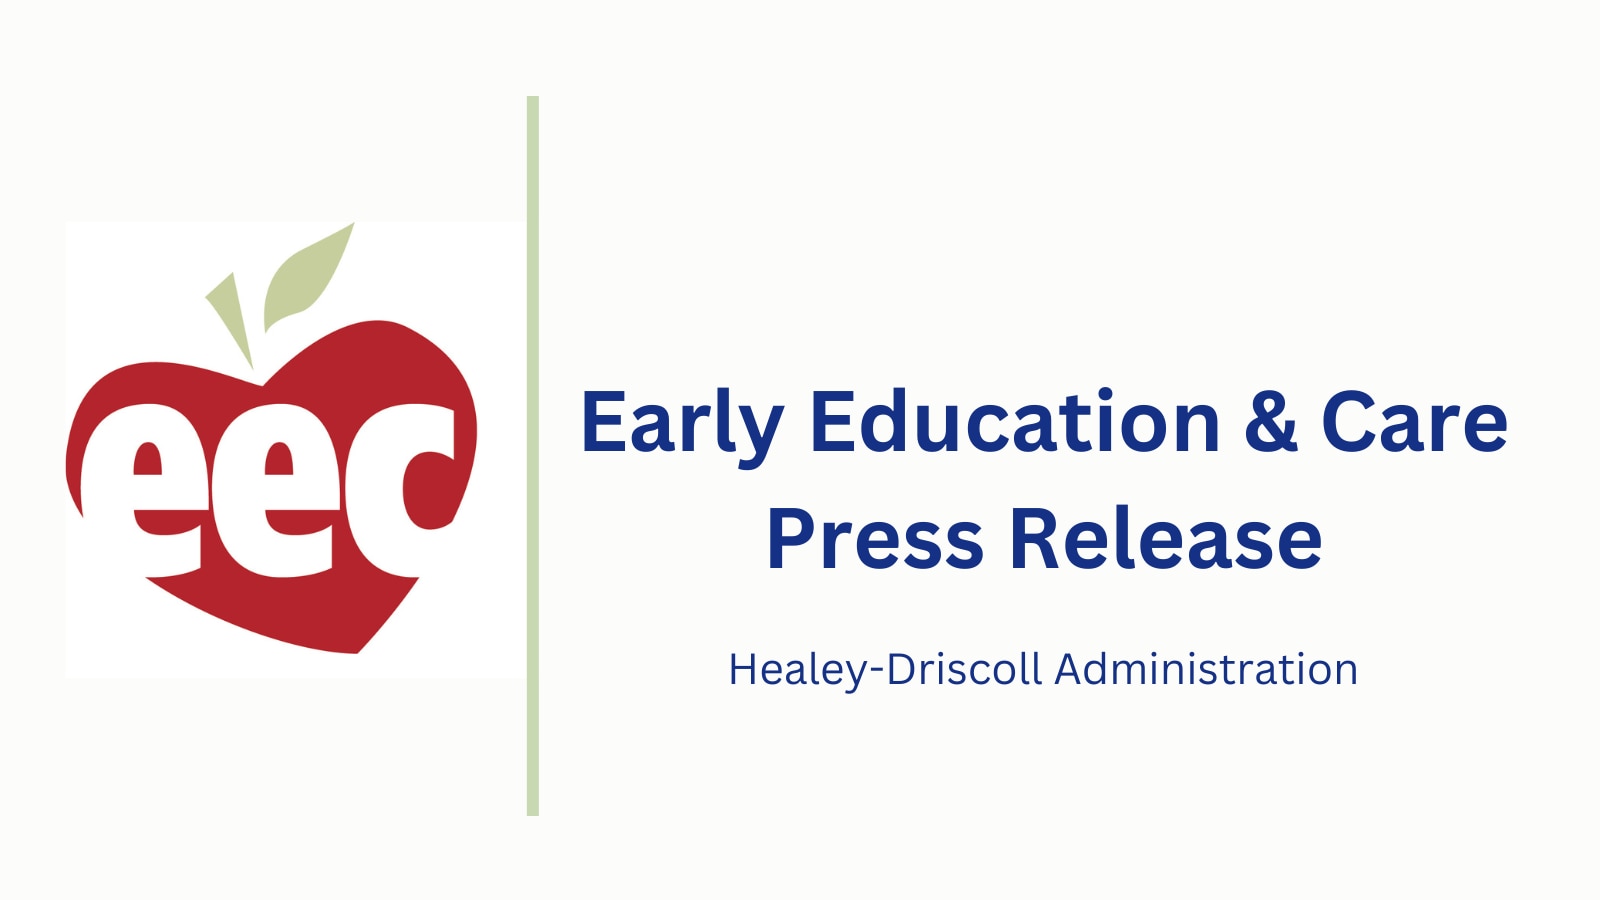 Early Education & Care Press Release